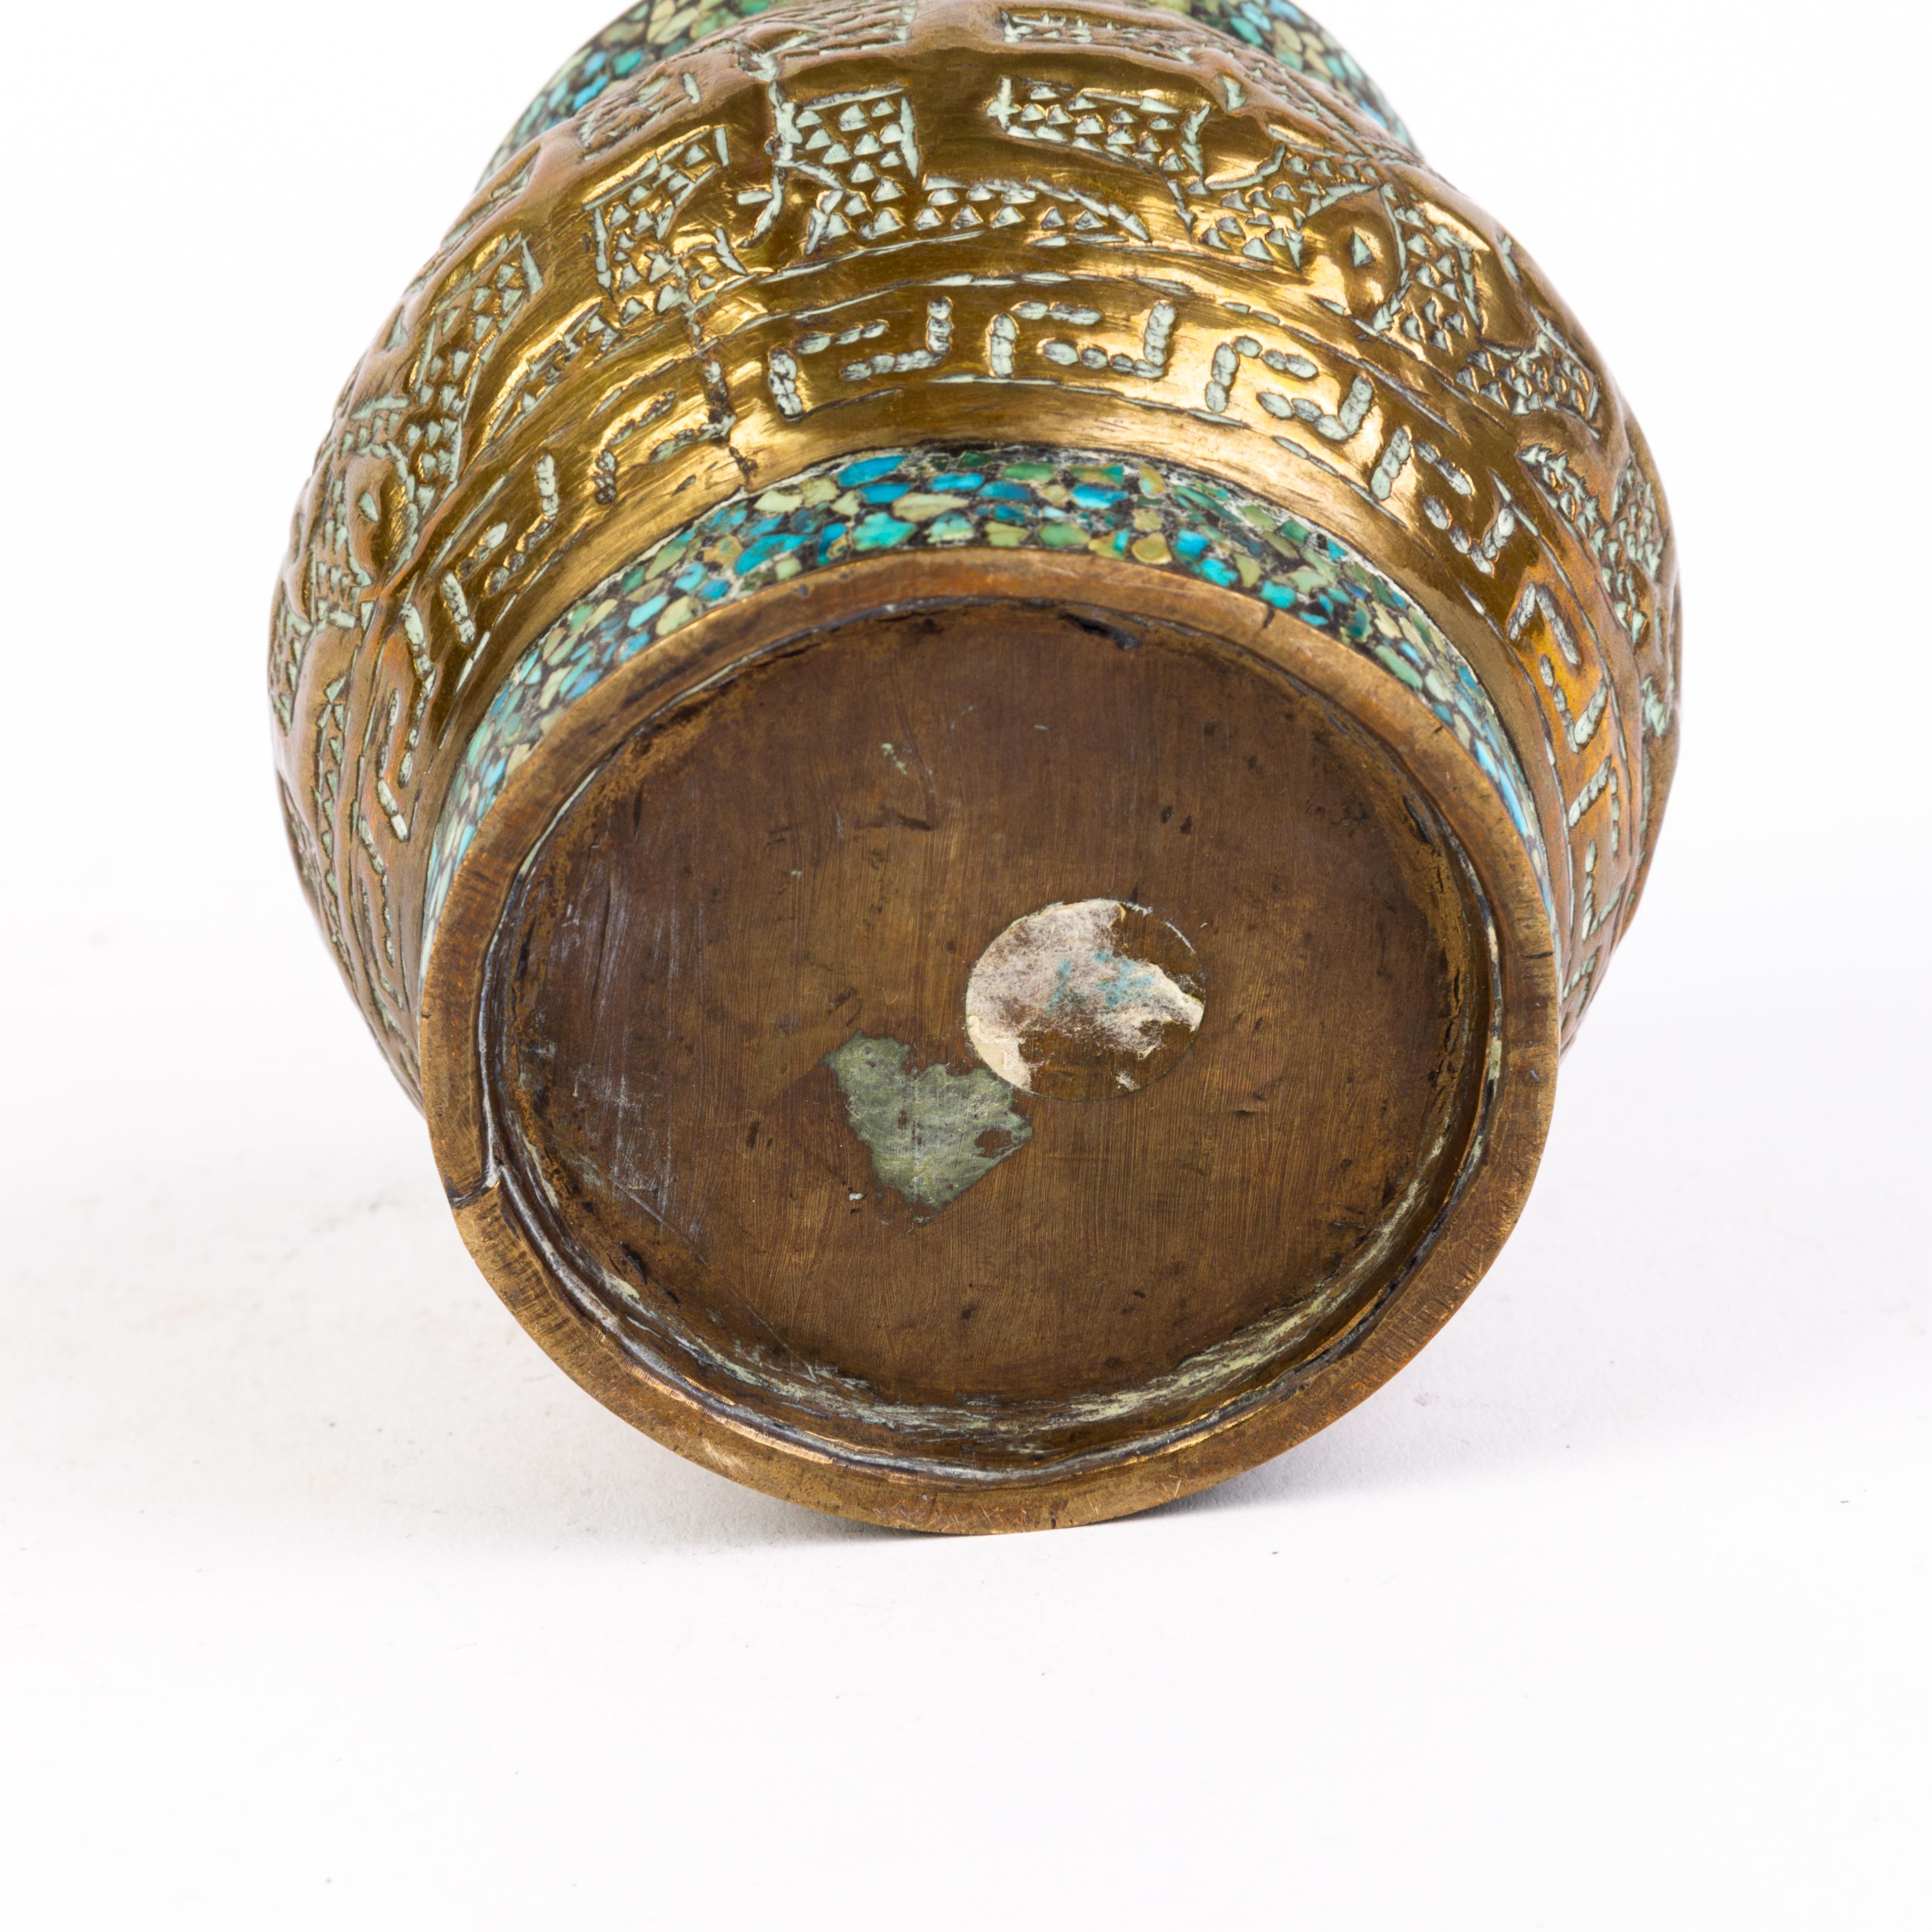 Chinese Tibetan Inlaid Turquoise Mosaic Brass Lidded Jar 19th Century  For Sale 3